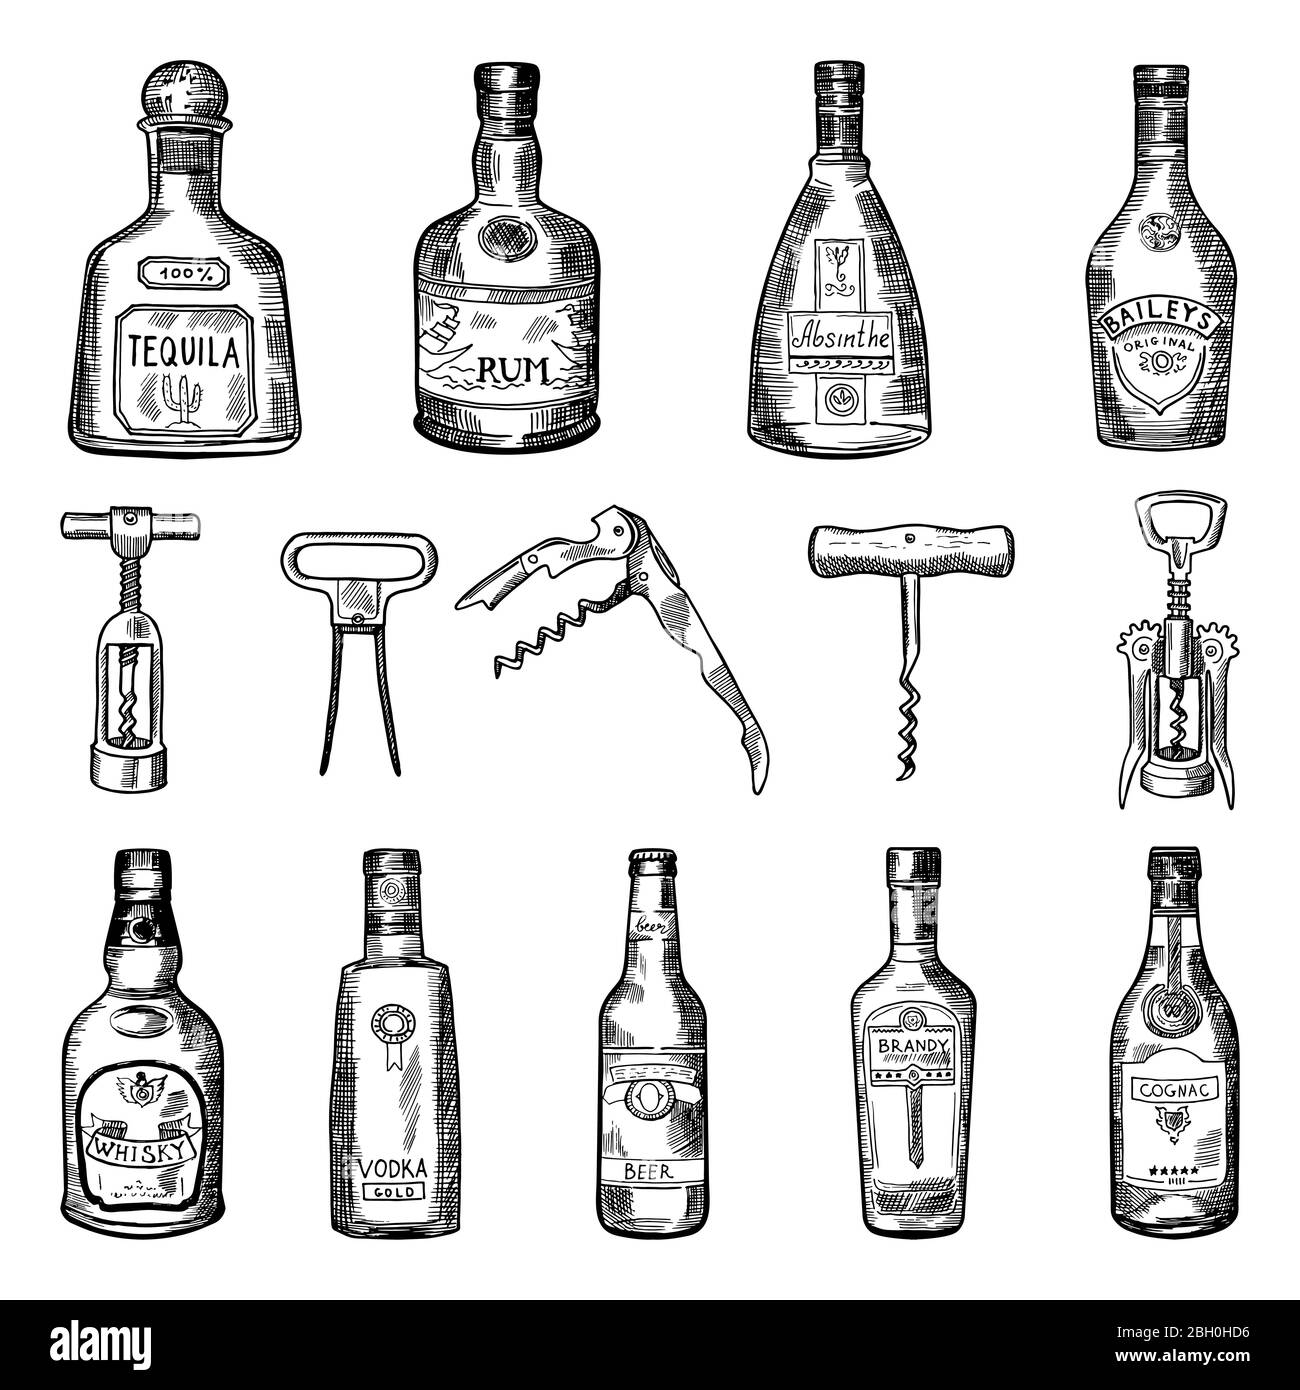 Illustrations of corkscrew and different wine bottles. Alcohol tequila and rum, absinthe and baileys, cognac and whisky vector Stock Vector